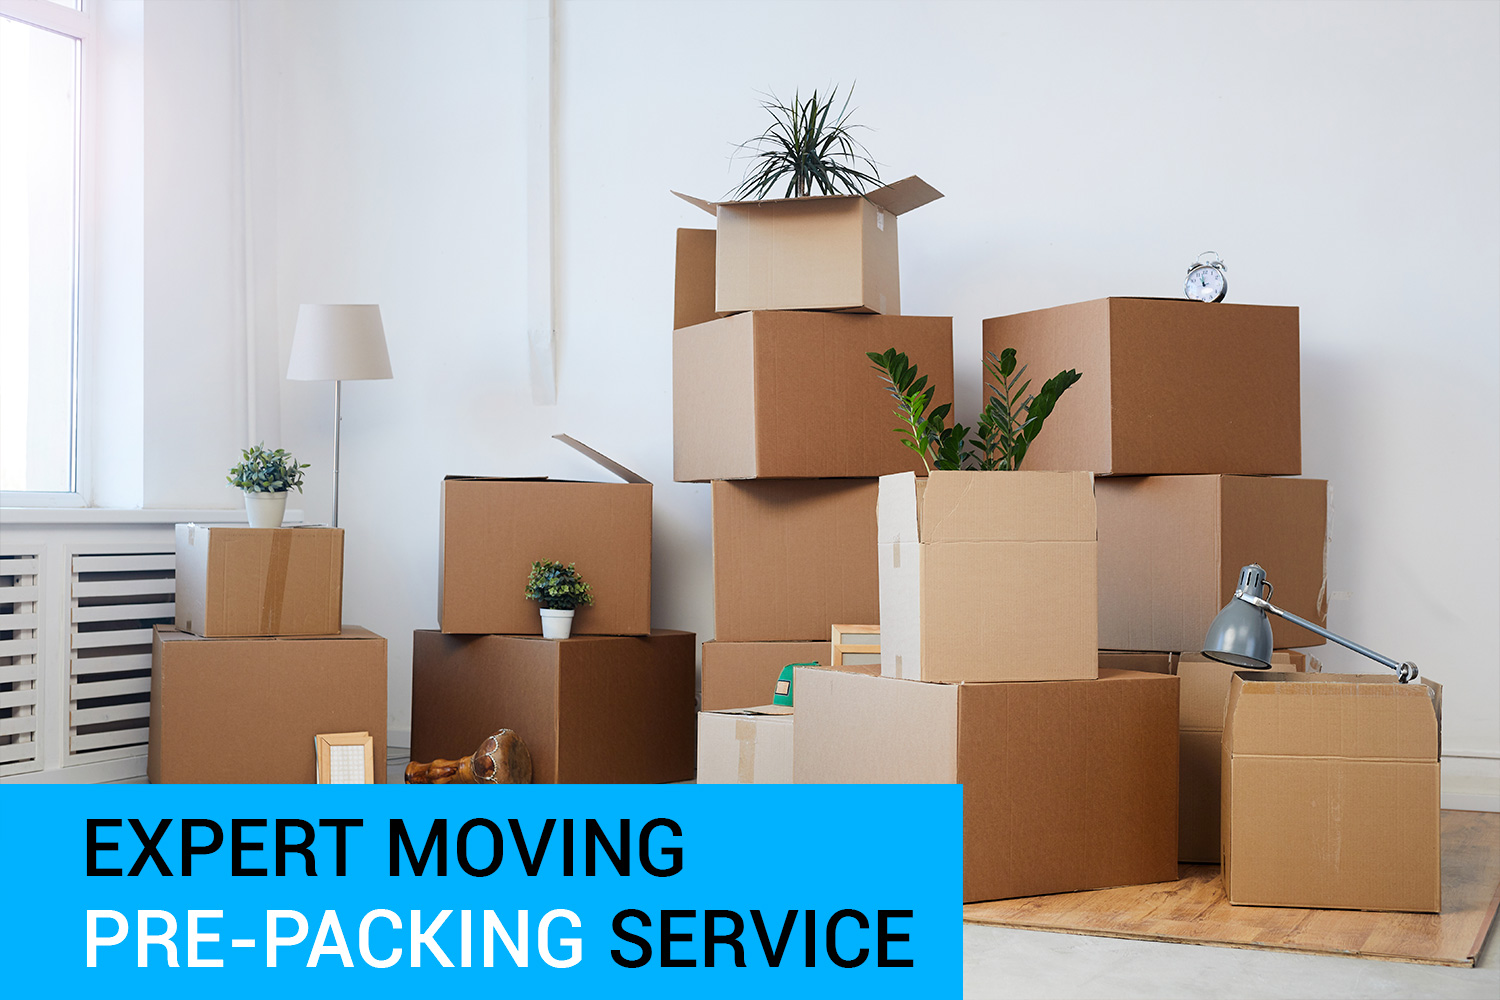 Expert Moving Pre-Packing Services in Melbourne